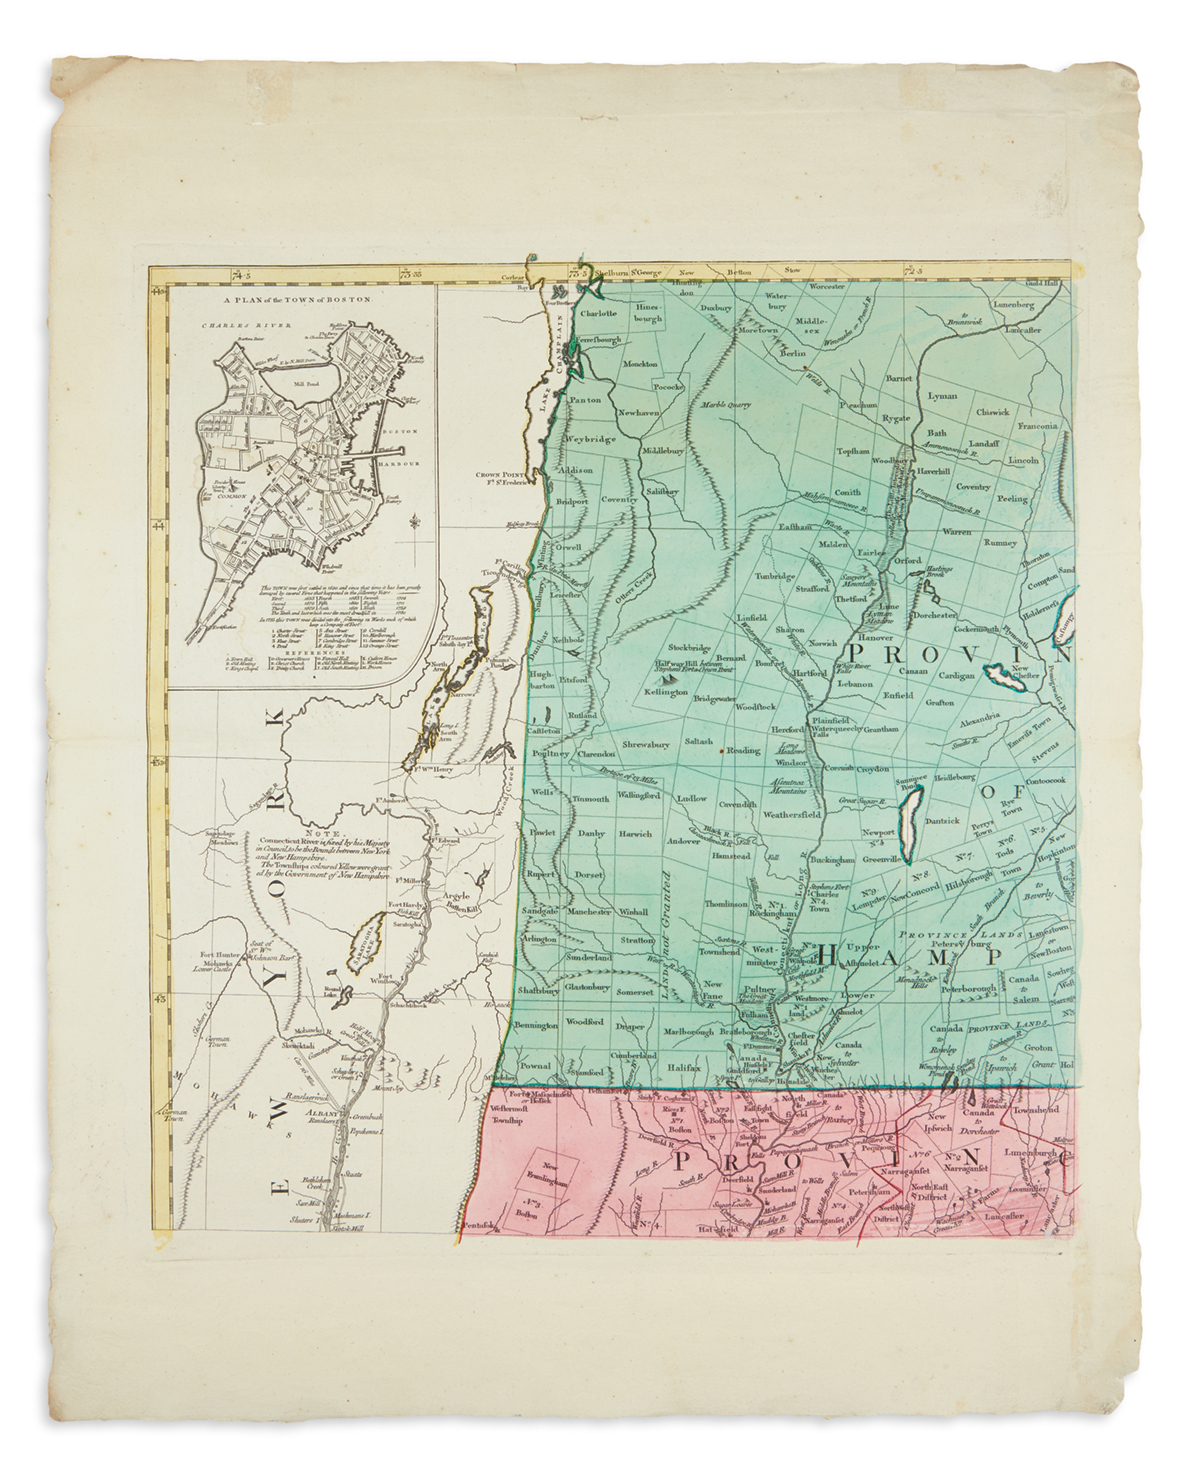 LOTTER, TOBIAS CONRAD; after MEAD, BRADDOCK, alias GREEN, JOHN. A Map of the Most Inhabited Part of New England,